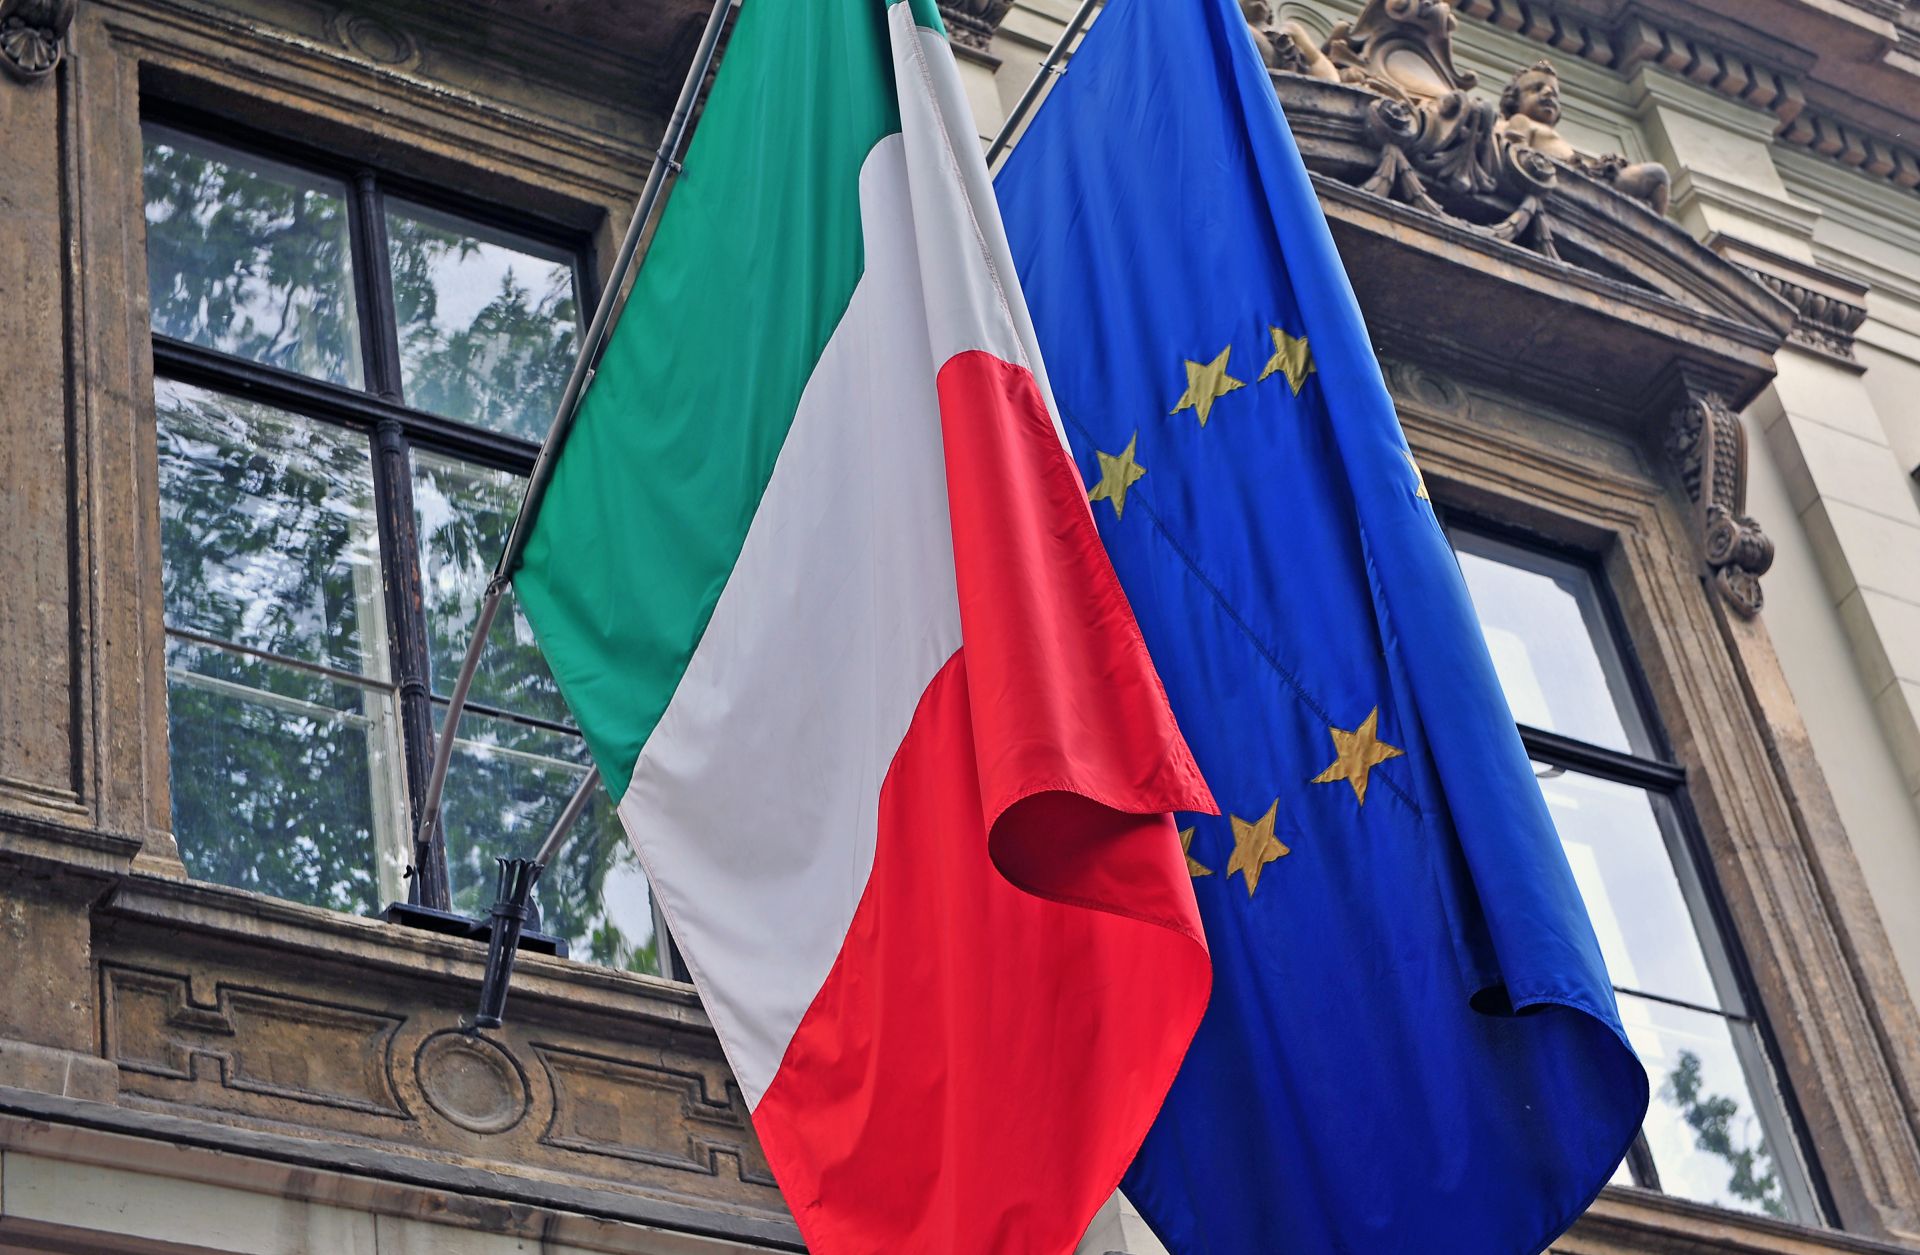 The Italian and EU flags hang side by side from the facade of a government building in Italy.